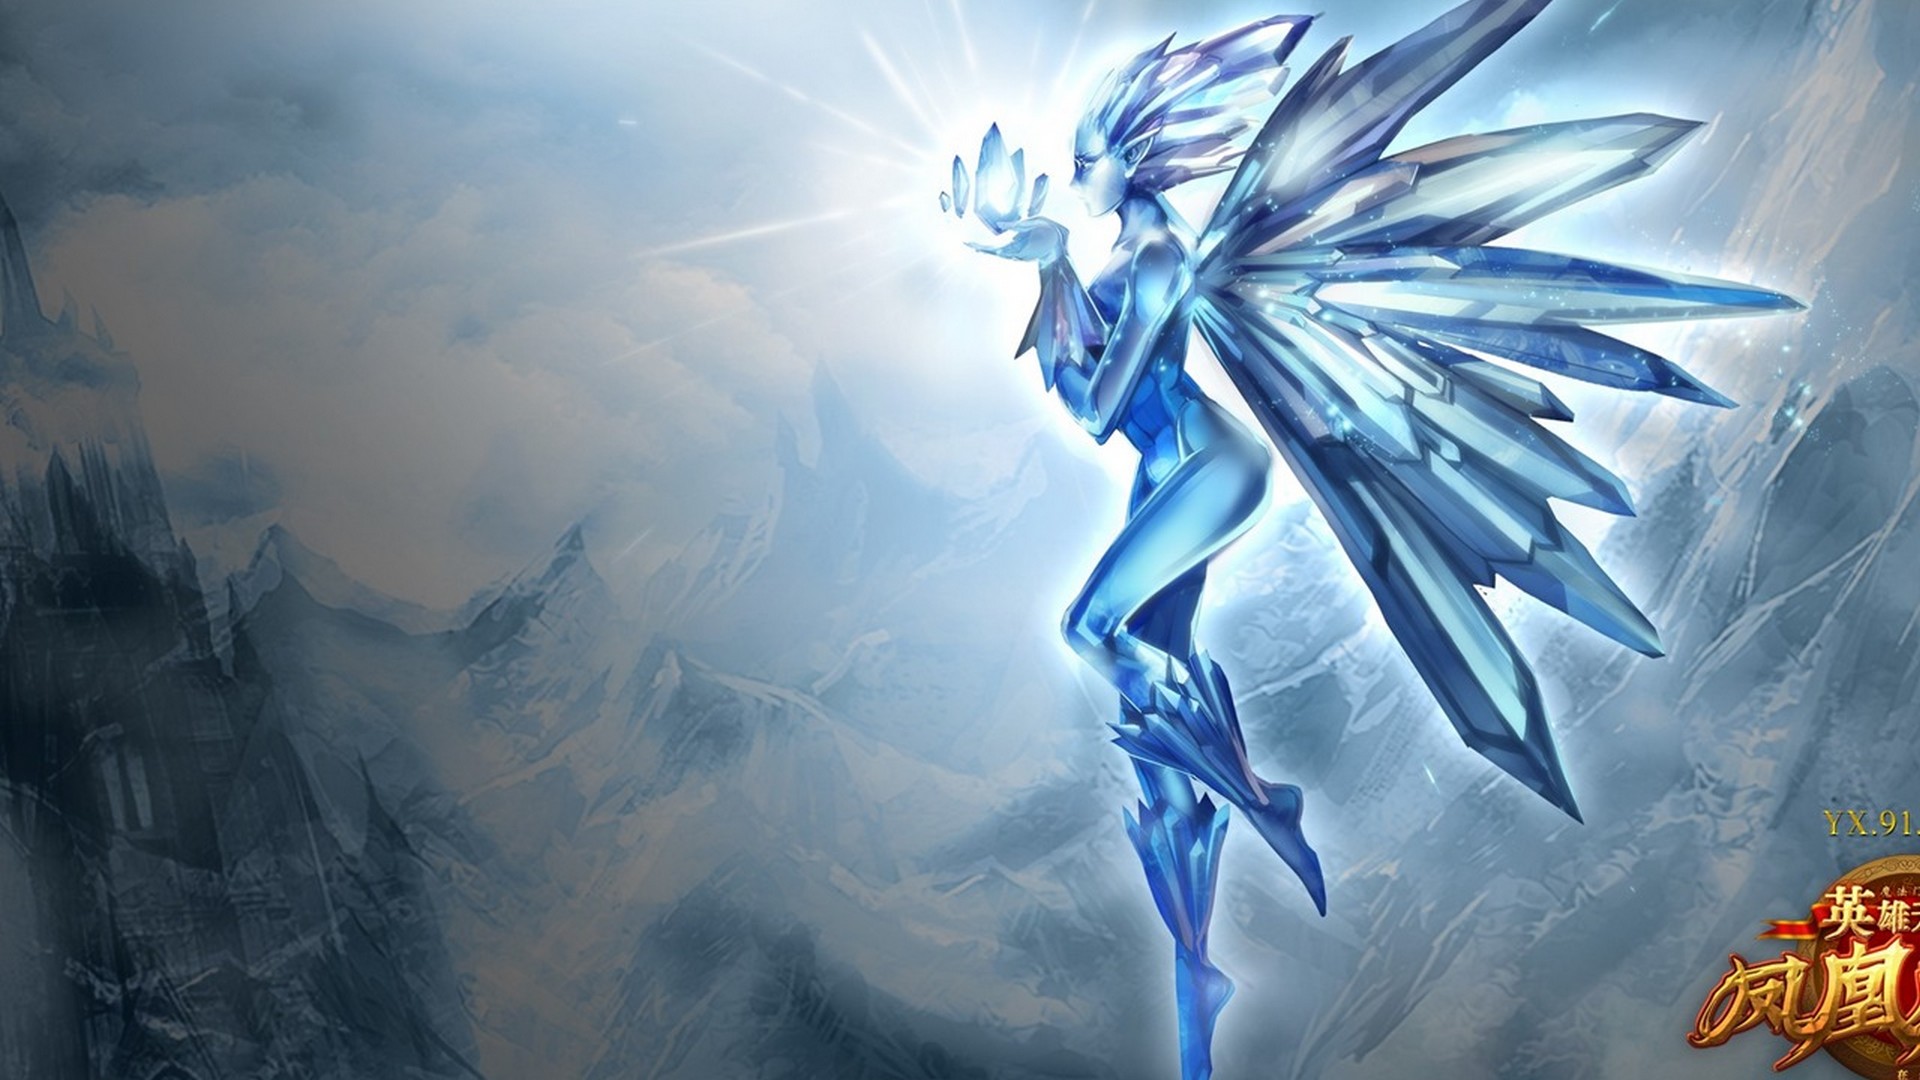 Best Ice Phoenix Wallpaper HD with image resolution 1920x1080 pixel. You can make this wallpaper for your Desktop Computer Backgrounds, Mac Wallpapers, Android Lock screen or iPhone Screensavers